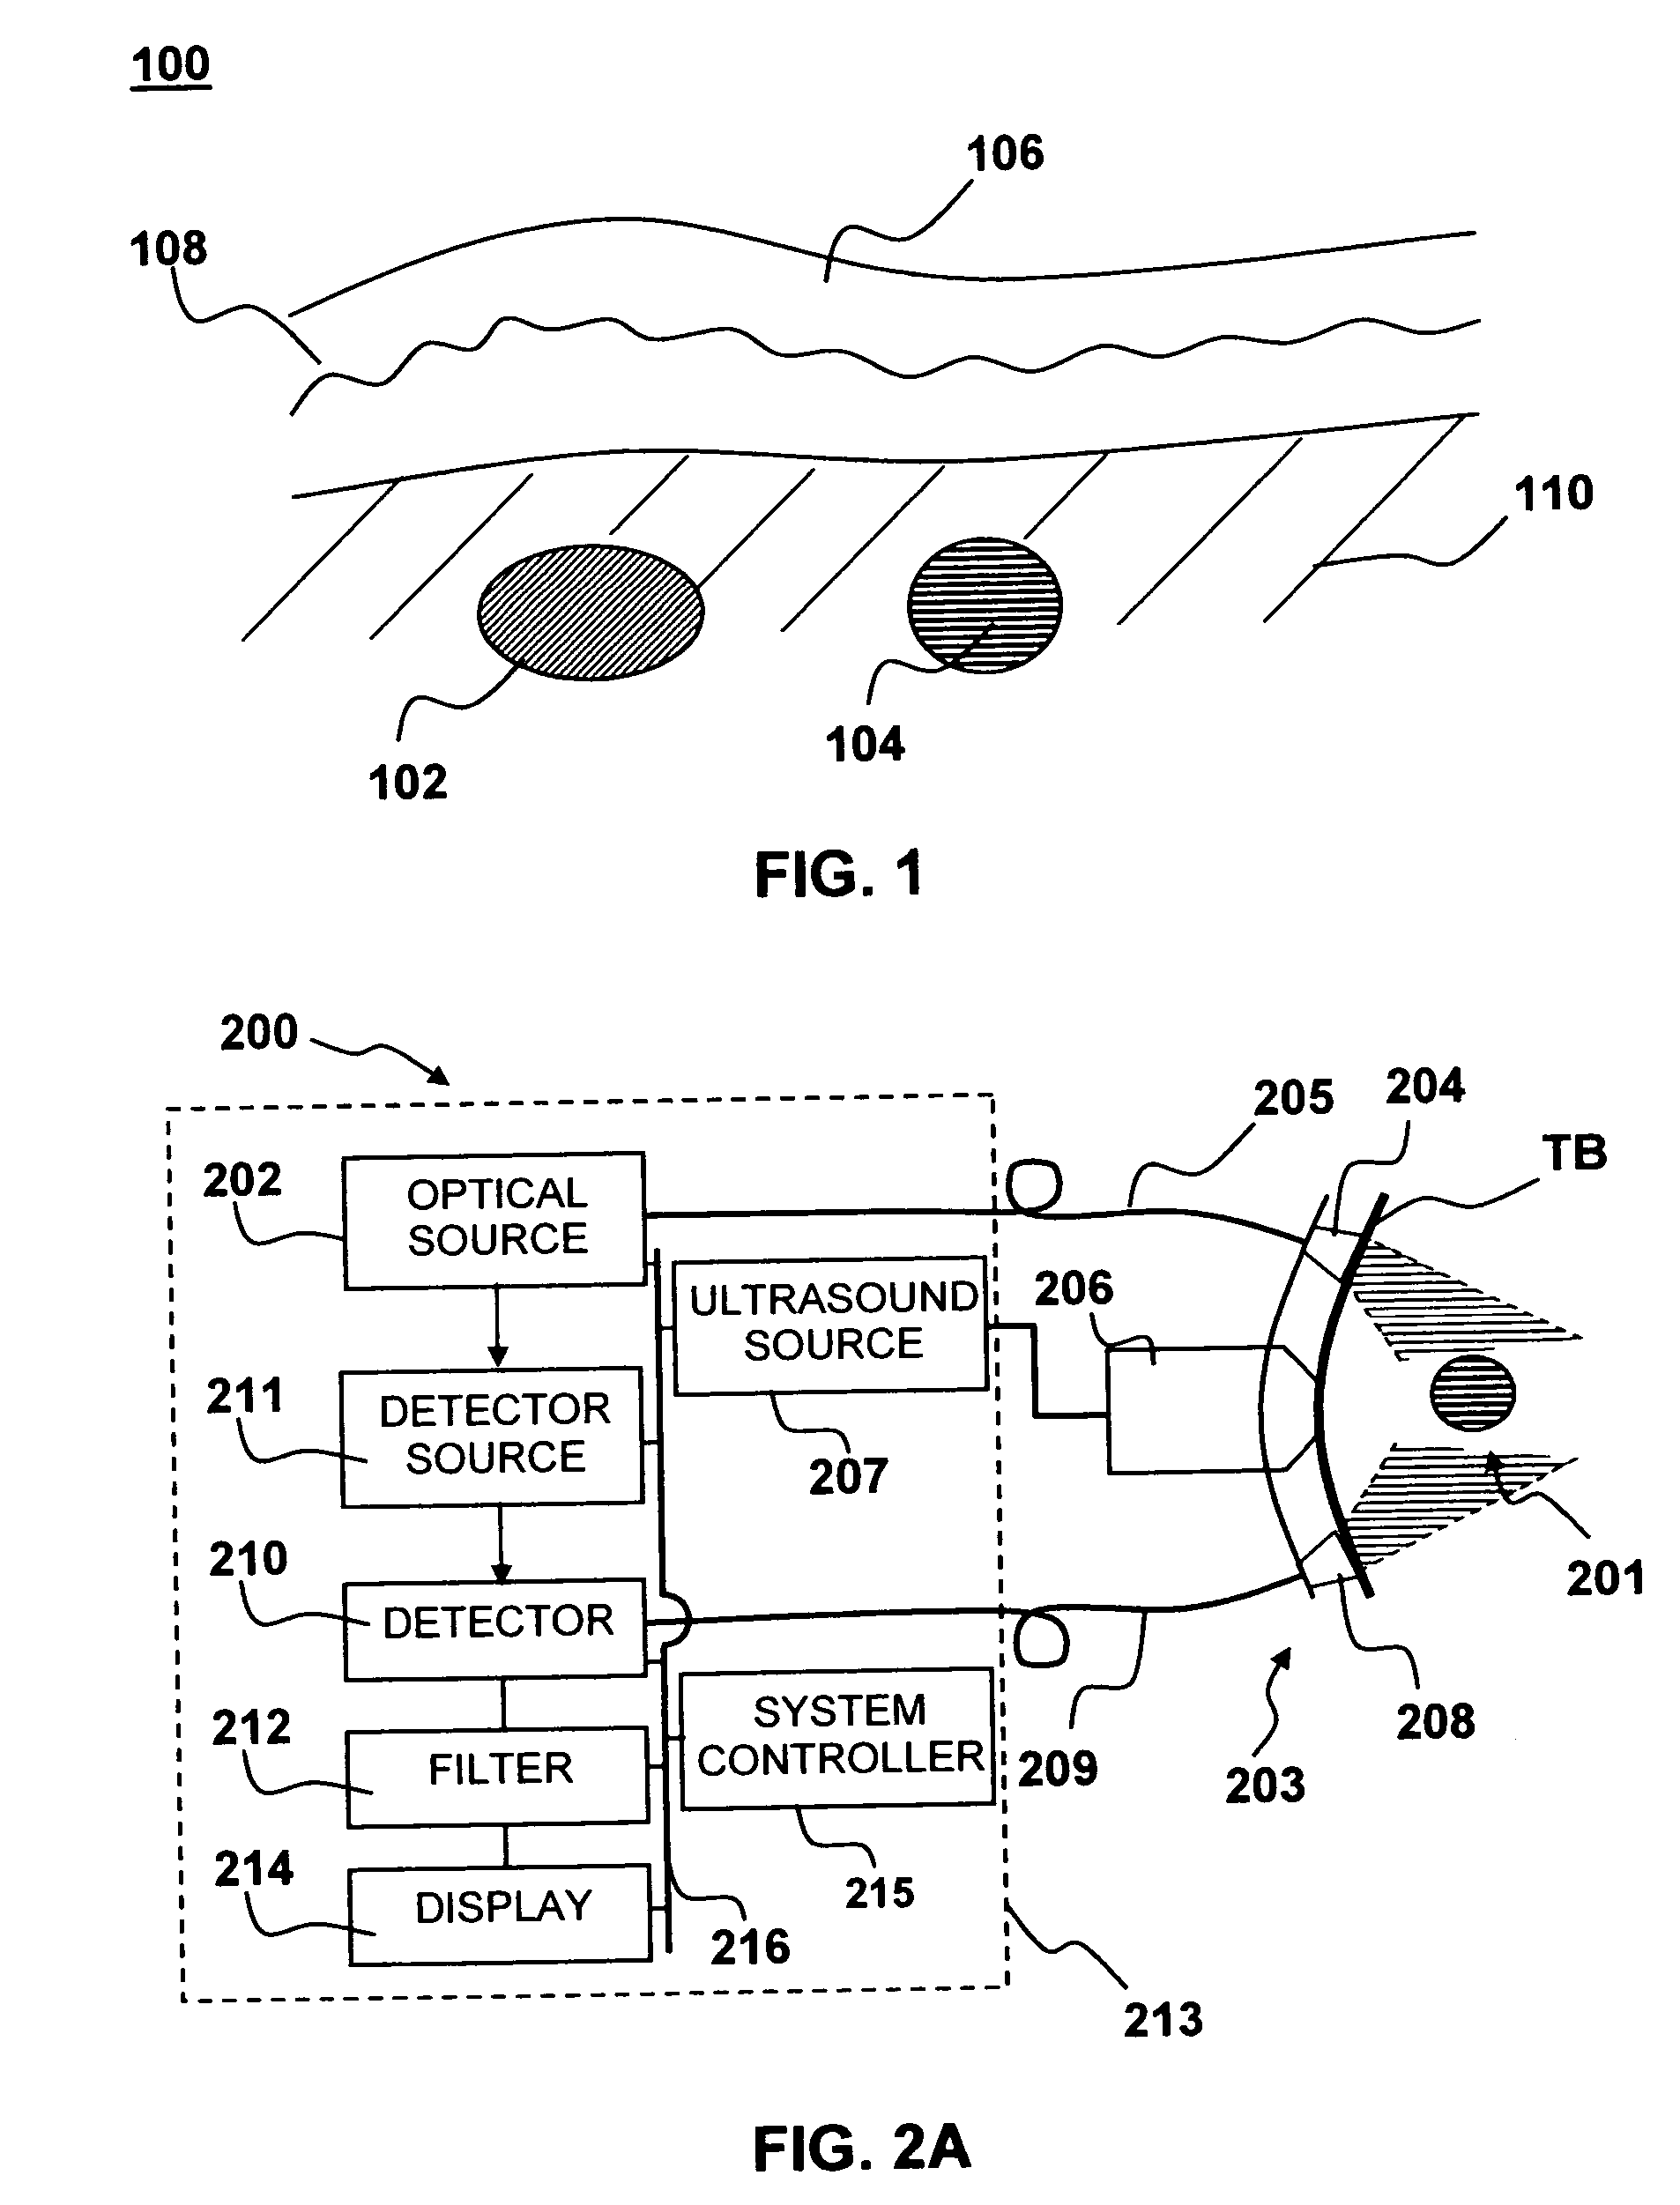 Apparatus and method for non-invasive and minimally-invasive sensing of venous oxygen saturation and pH levels